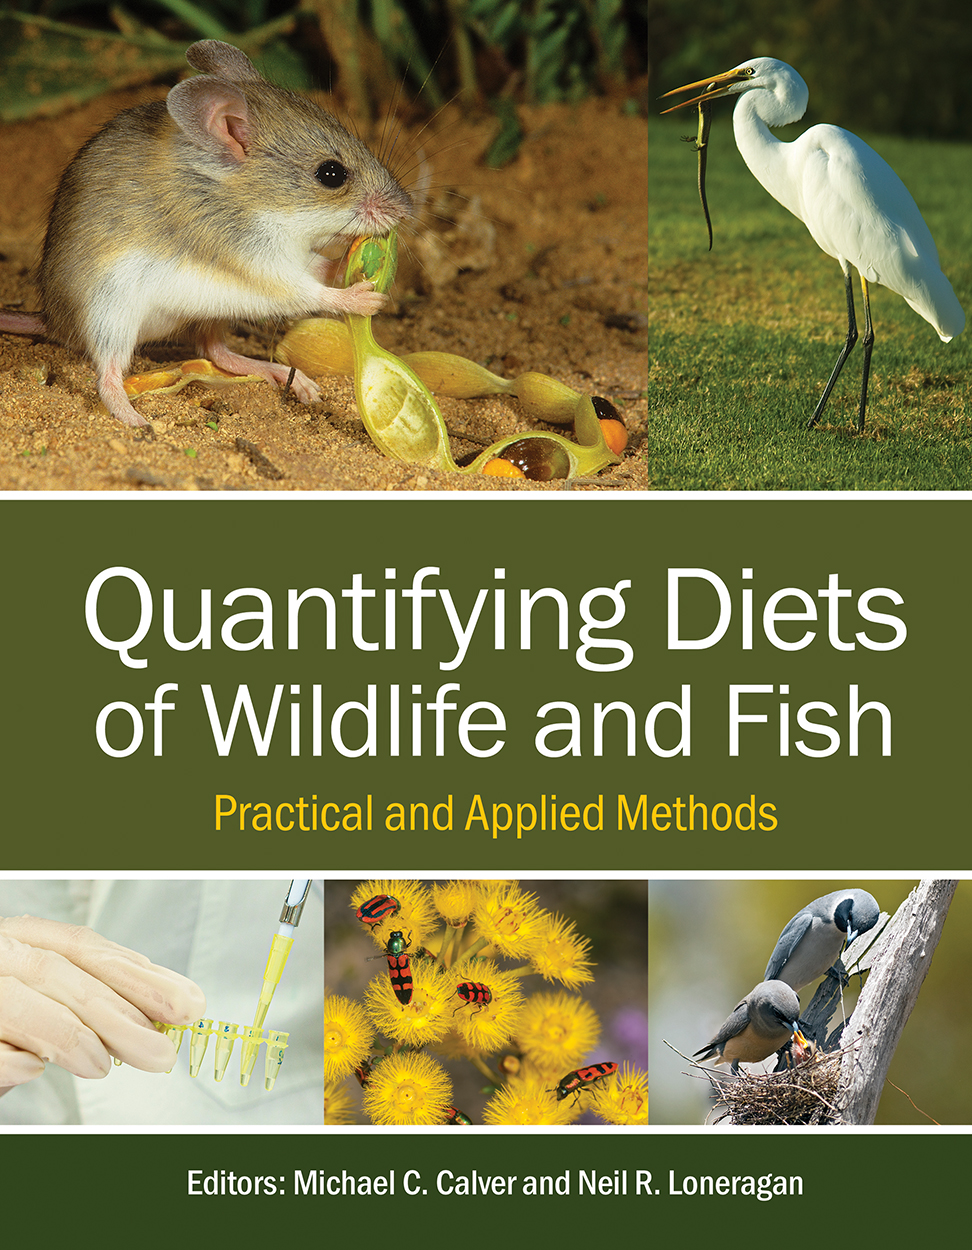 Cover of 'Quantifying Diets of Wildlife and Fish', featuring photos of a mouse, an egret, lab work, jewel beetles on flowers and woodswallows.